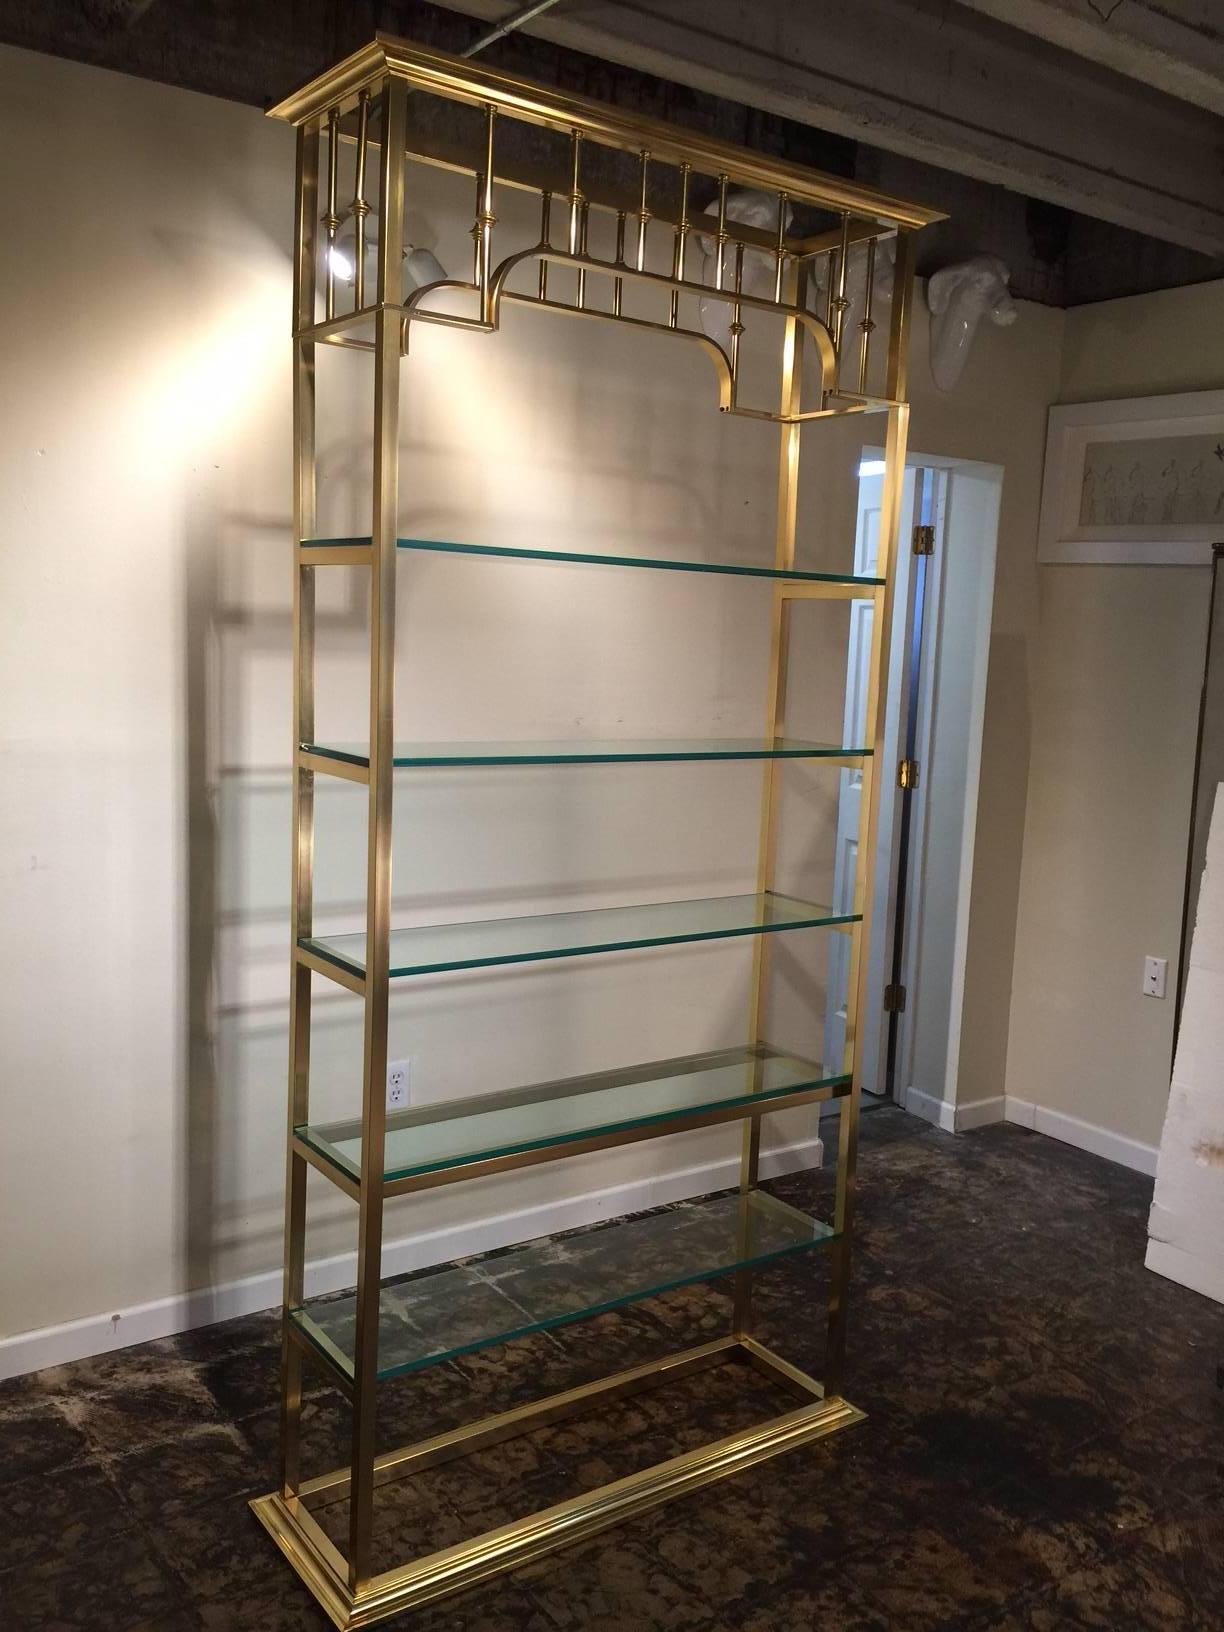 This very tall étagère shows five thick glass shelves (can take two more if desired) and is very stable. This design is truly chic!